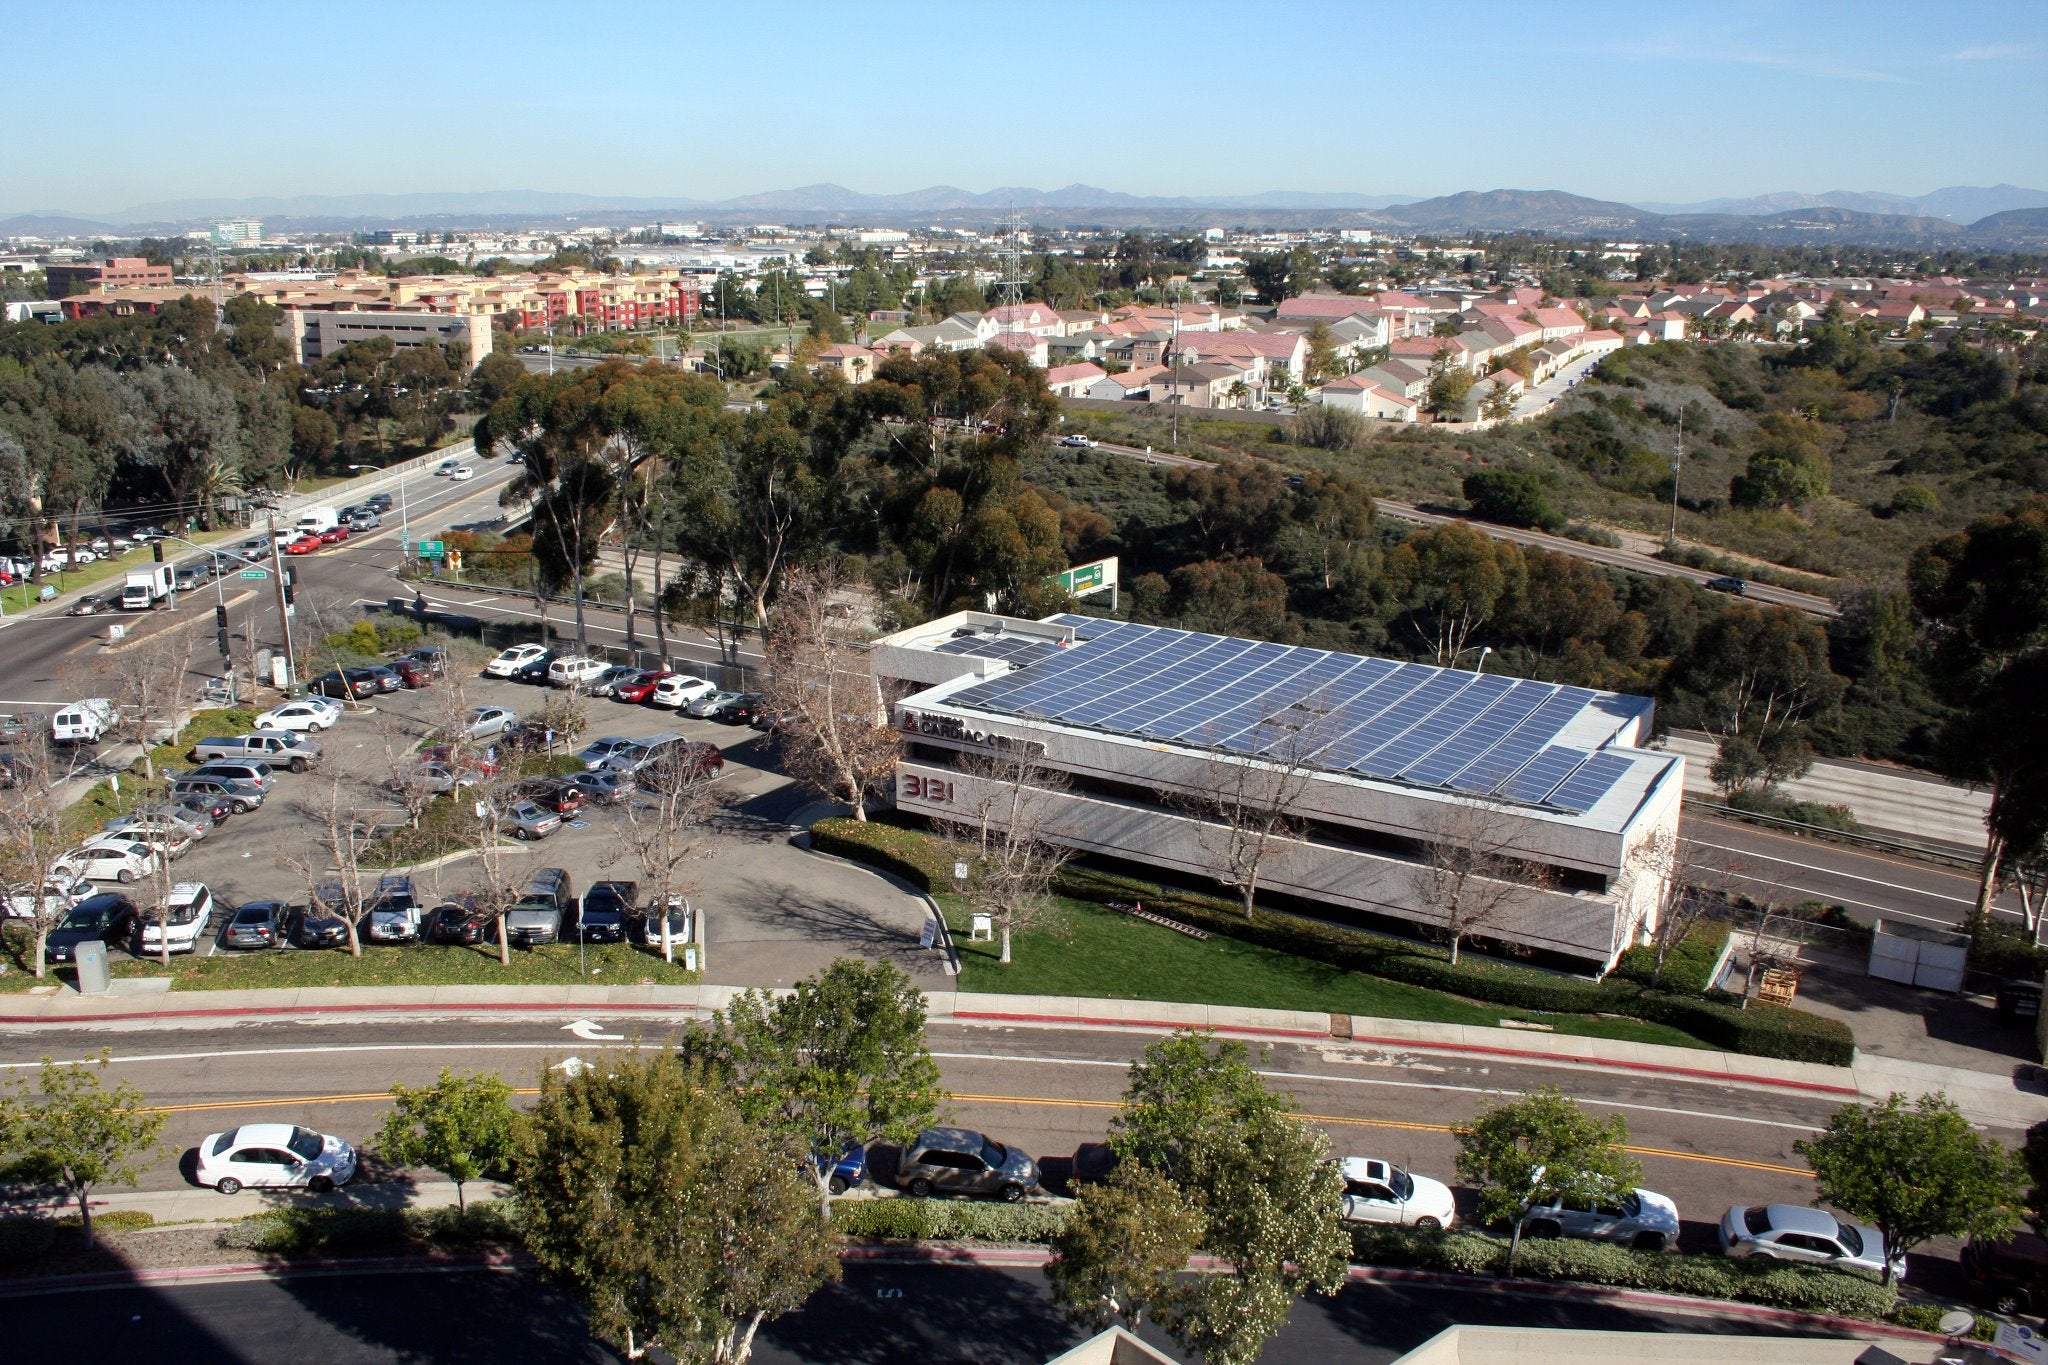 This new 60kW solar PV system at the San Diego Cardiac Center 